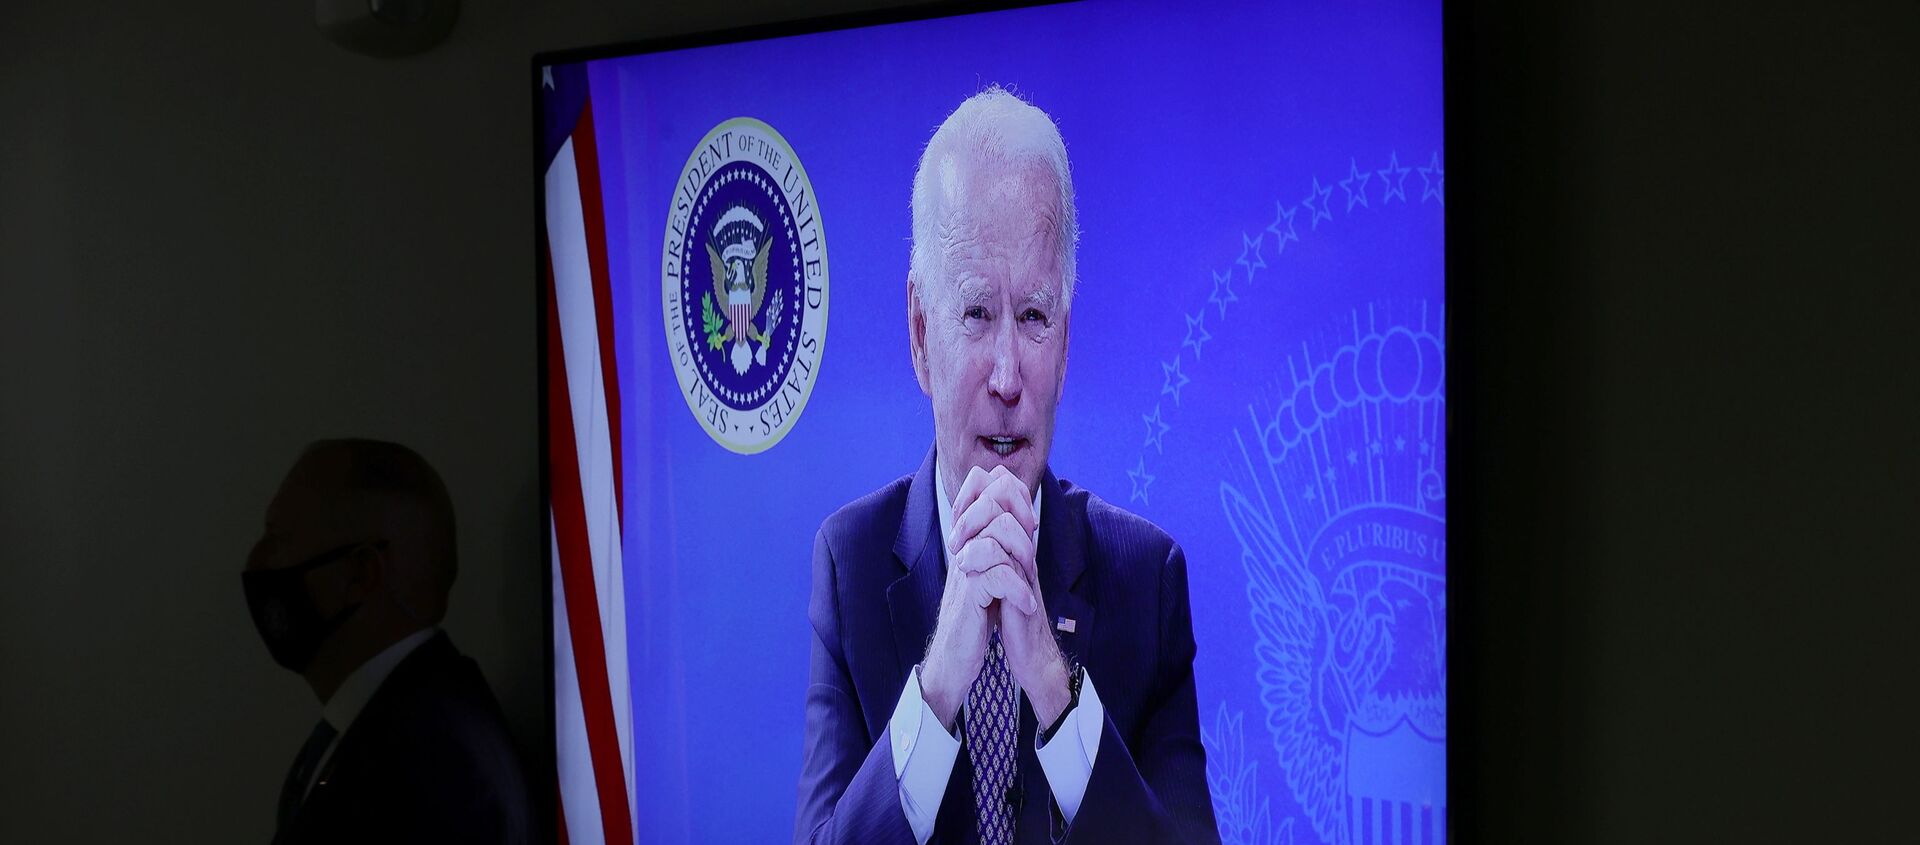 U.S. President Joe Biden is seen on a video display as he delivers remarks virtually to the National Governors Association Winter Meeting from the South Court Auditorium at the White House in Washington, U.S., February 25, 2021 - Sputnik International, 1920, 26.02.2021